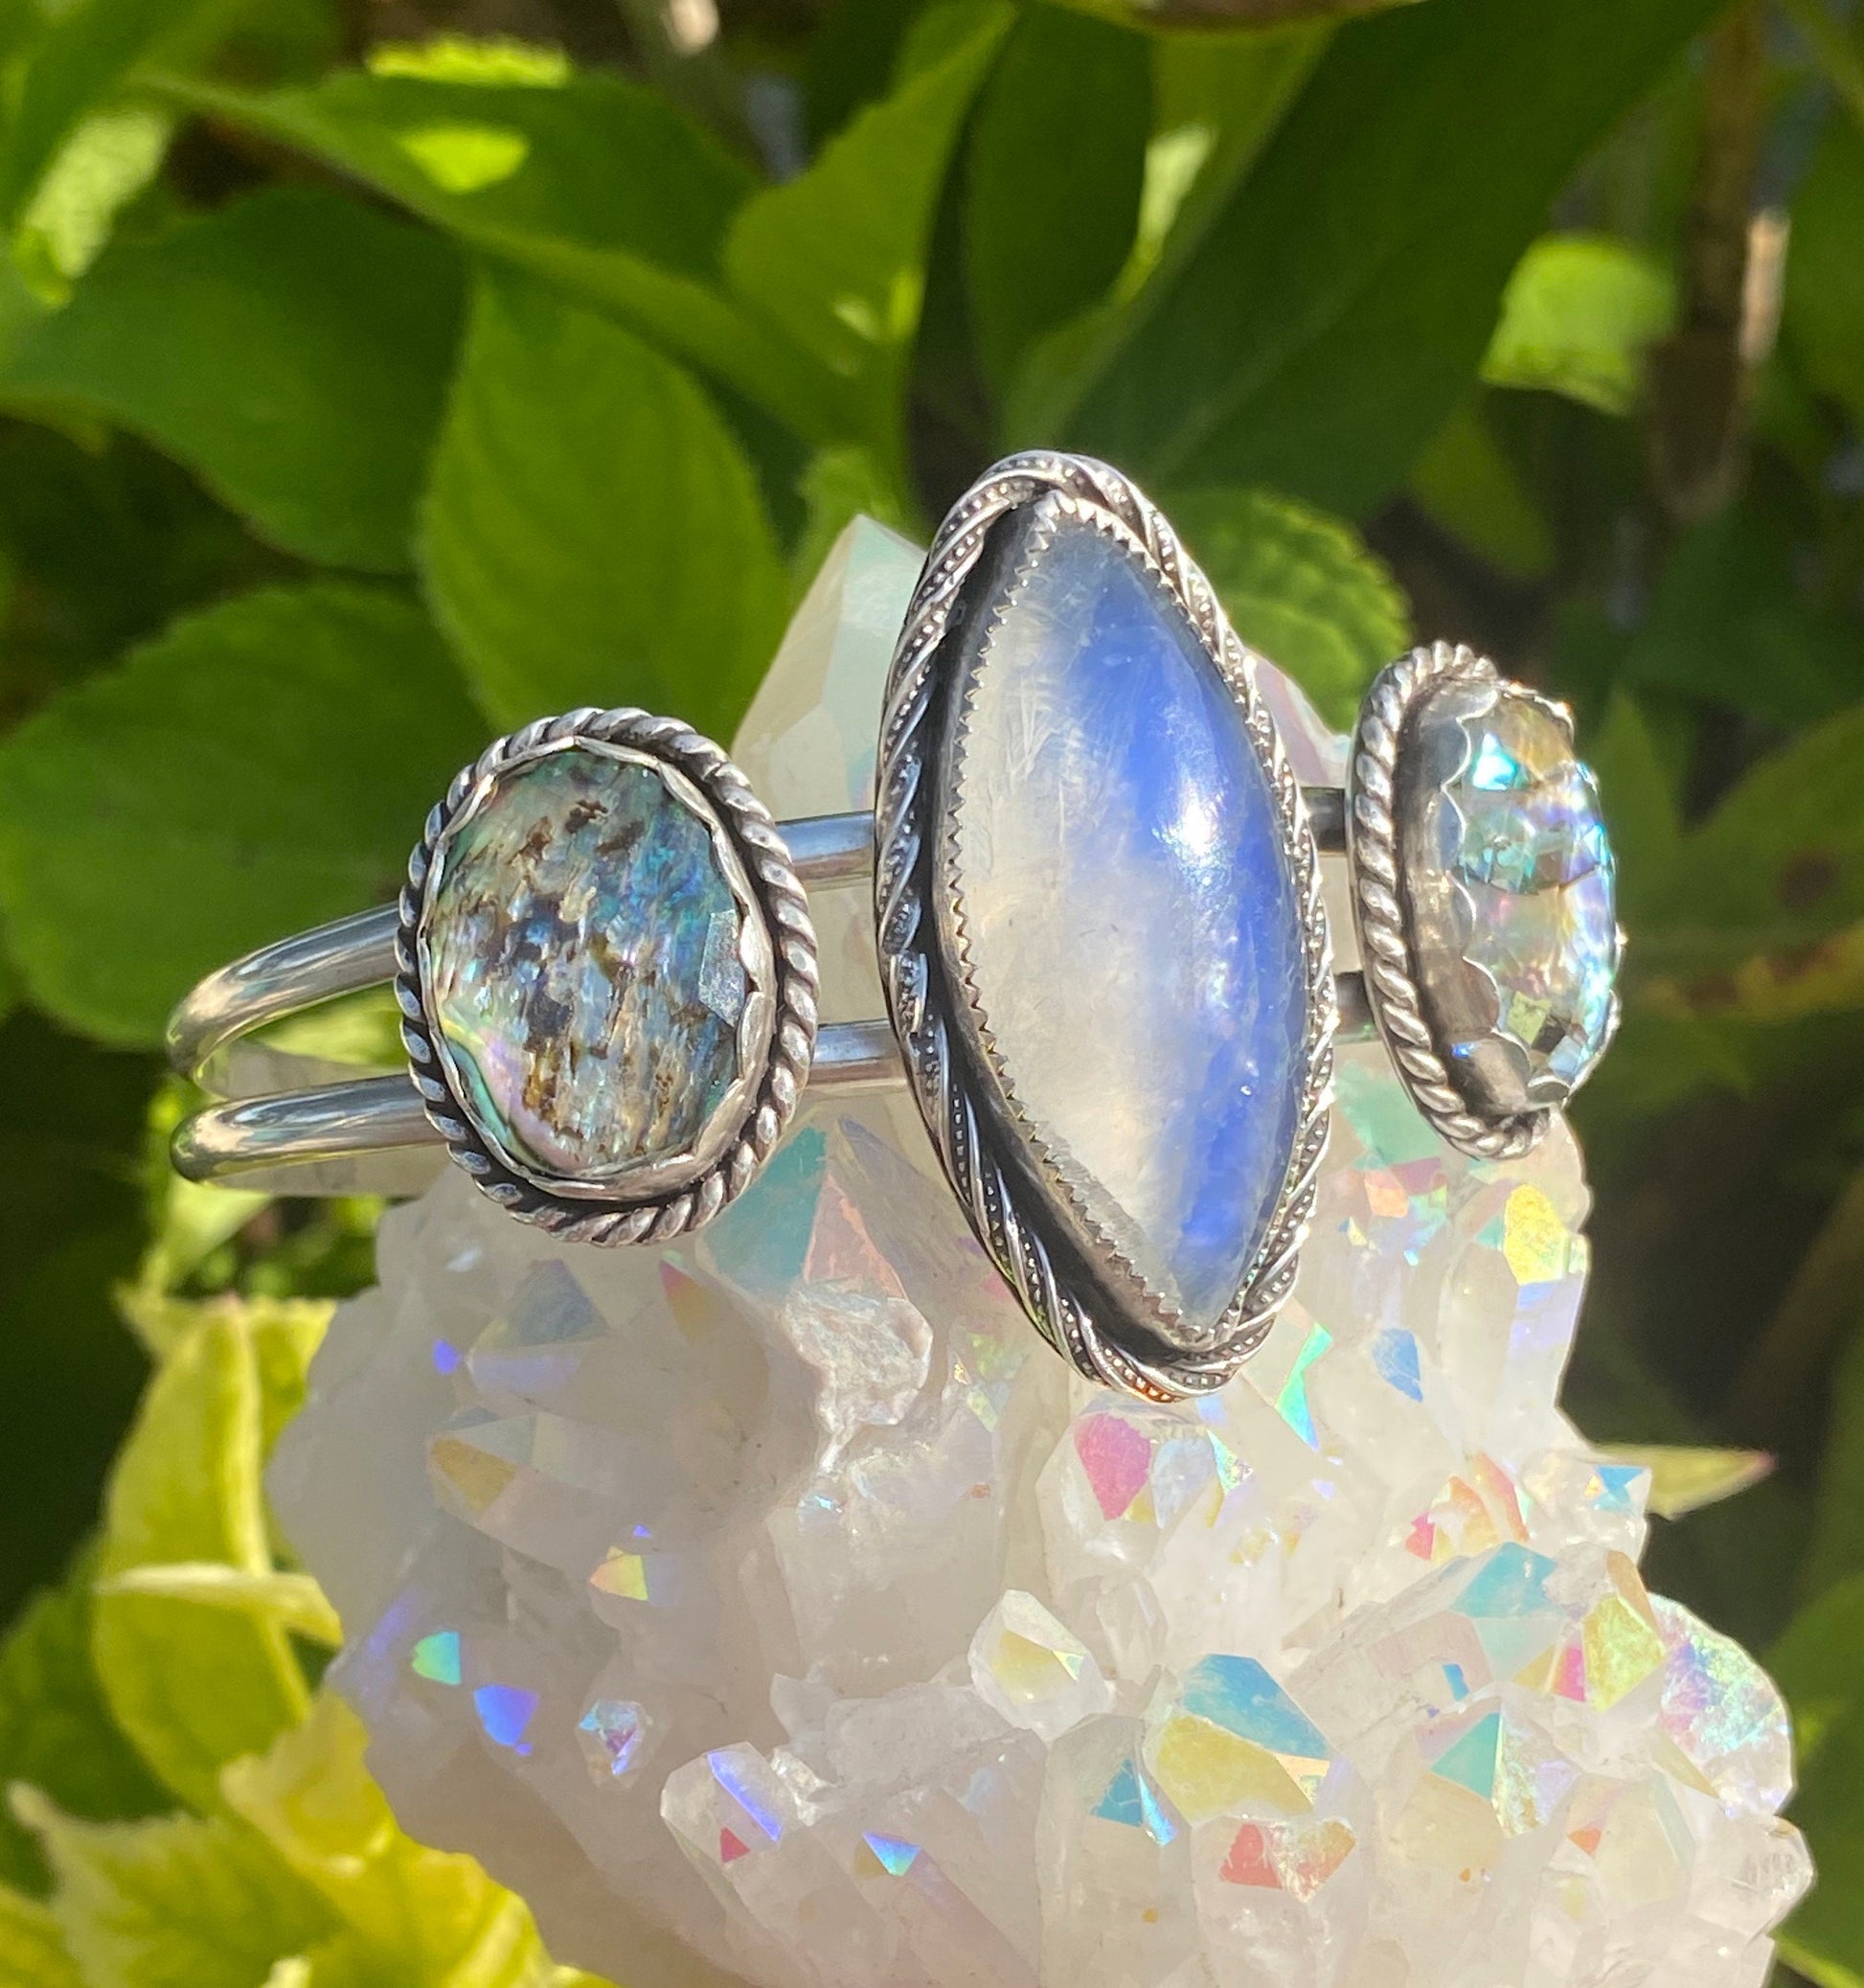 //Once Upon – Cuff Dream Abalone/Quartz Moonstone thebohemianfairie Collecti and Doublet a